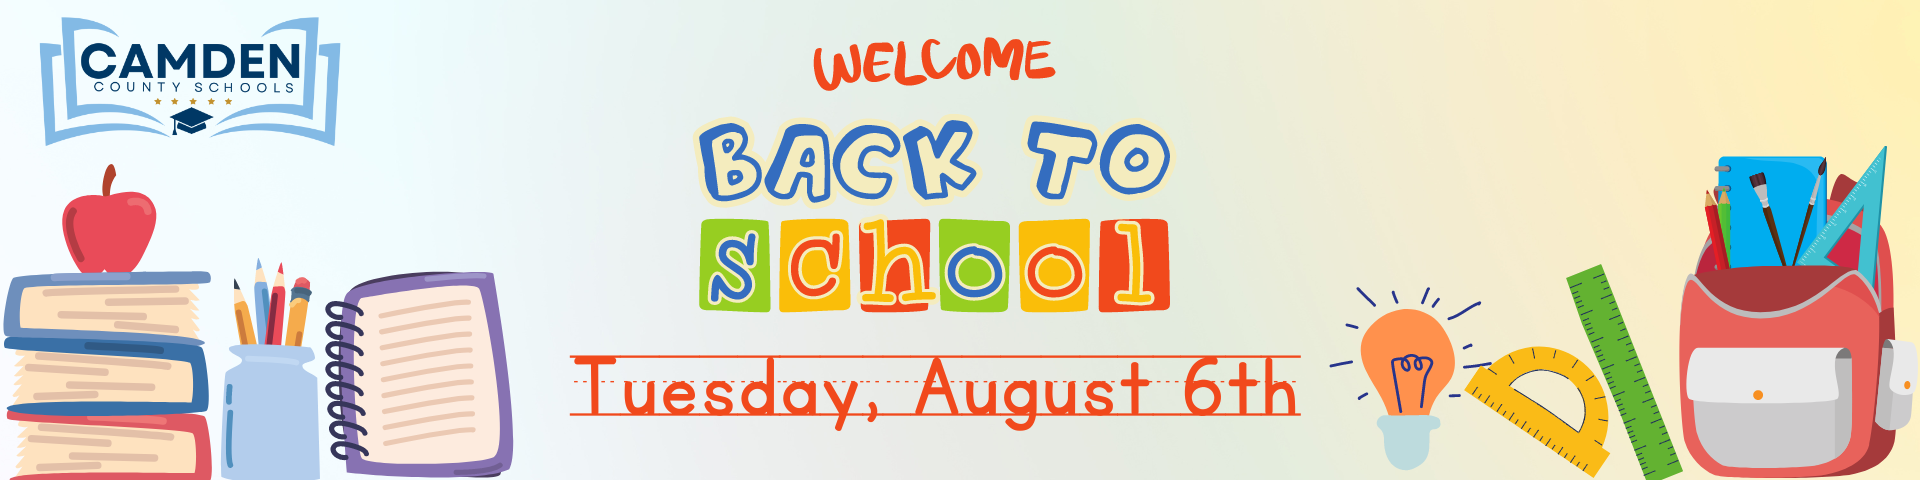 back to school banner tuesday august 6